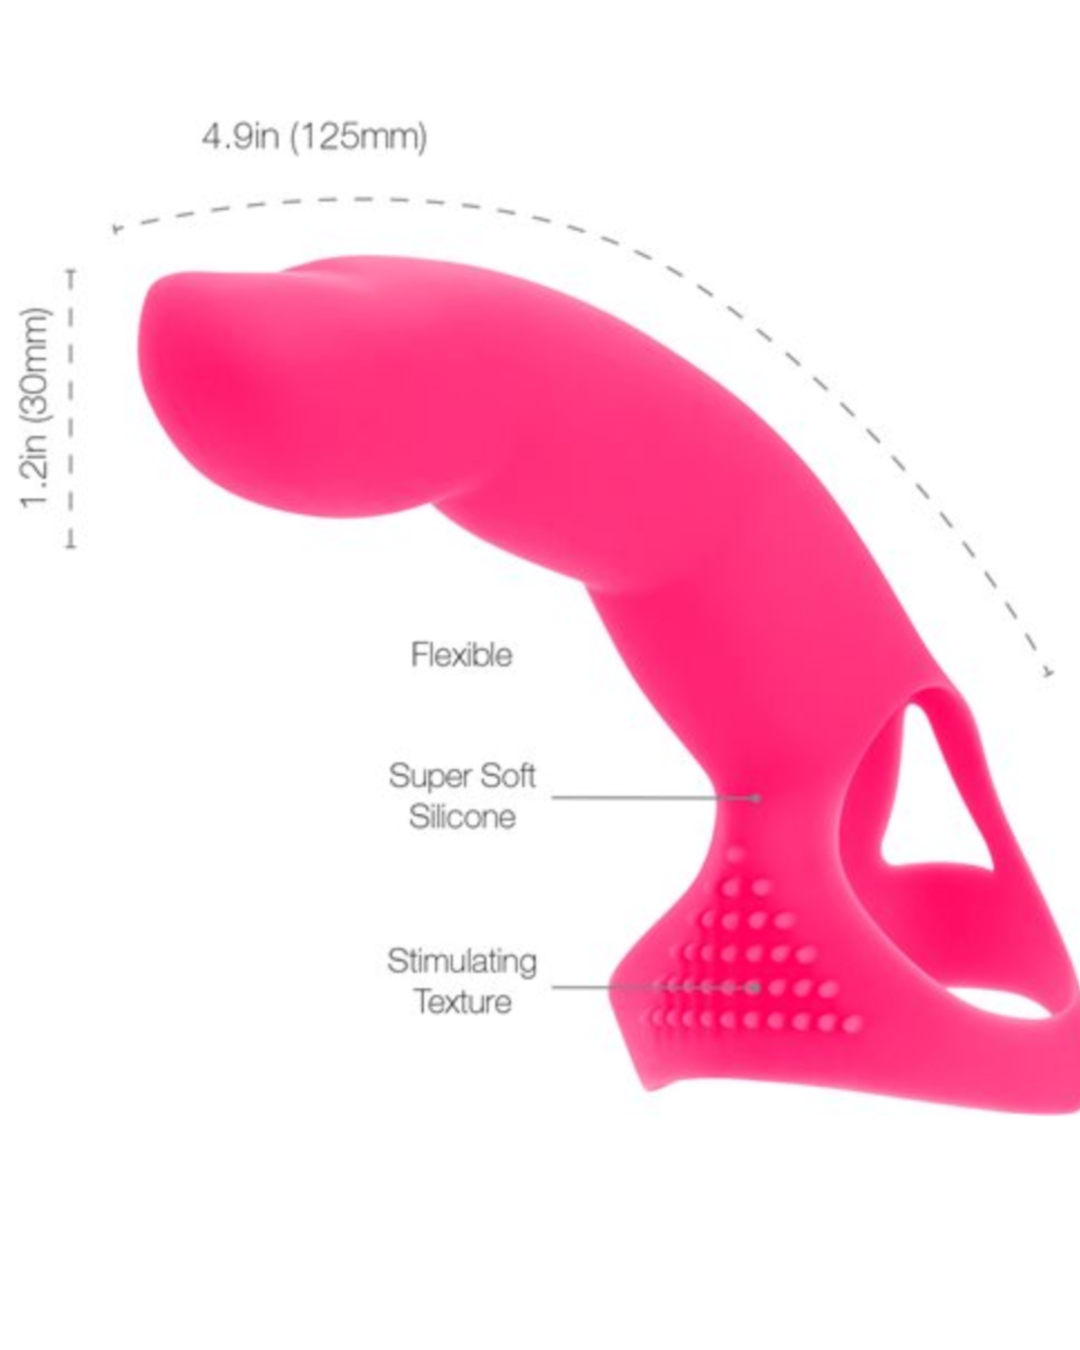 Simple and True Extra Touch Silicone G-Spot Finger Extender - Pink against a white background showing the measurements and design features